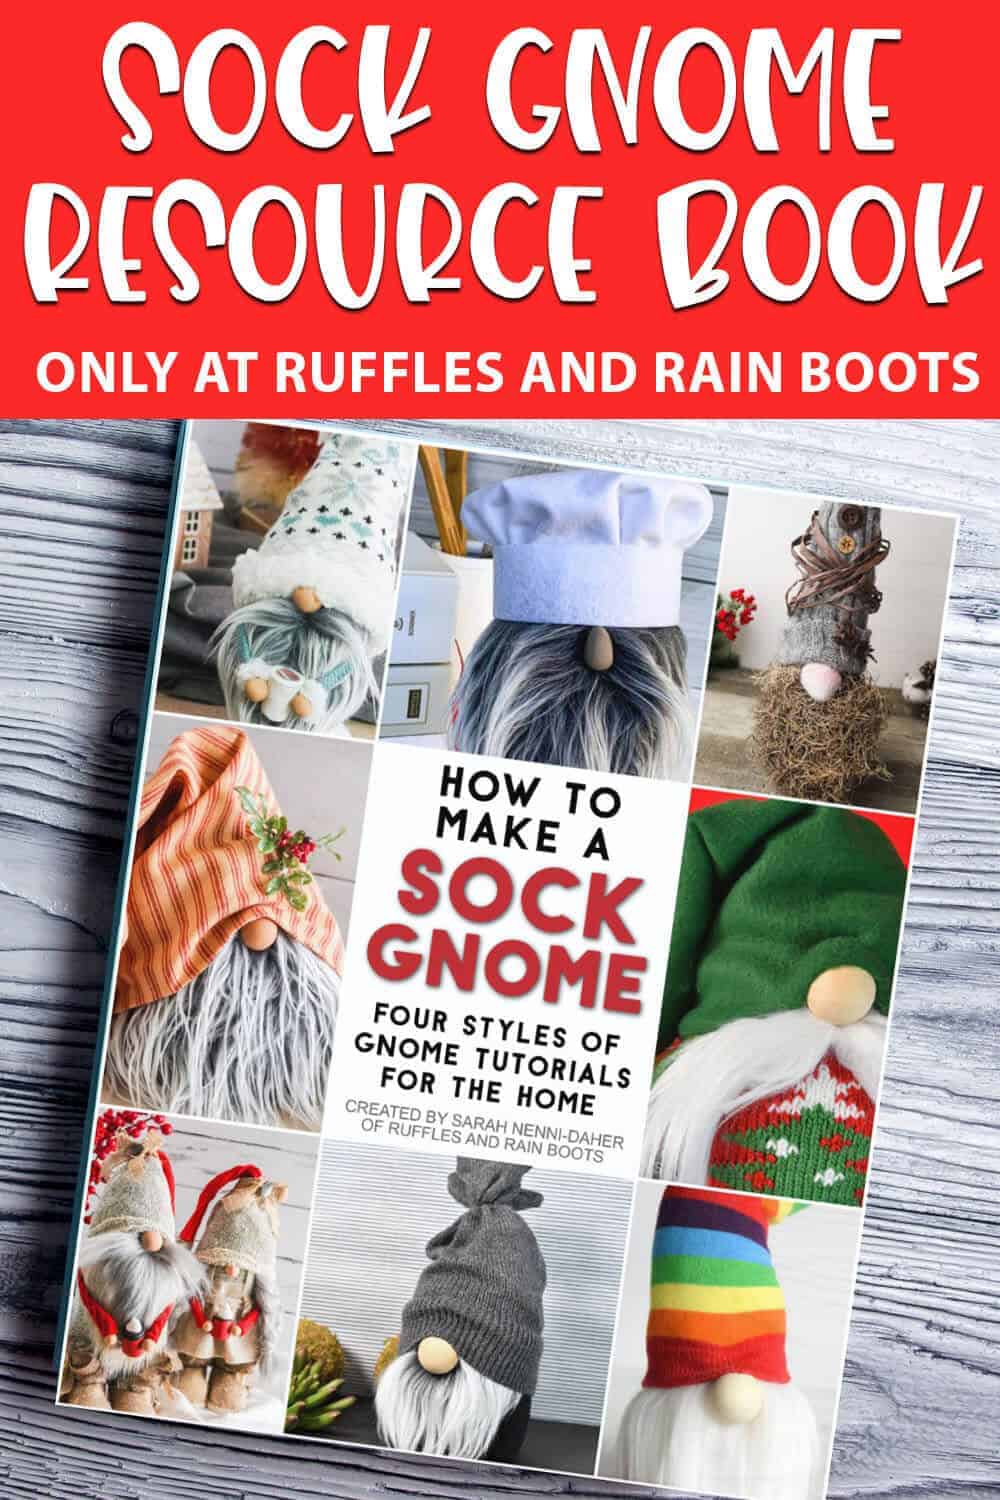 tutorial for a sock gnome wuth text which reads sock gnome resource book